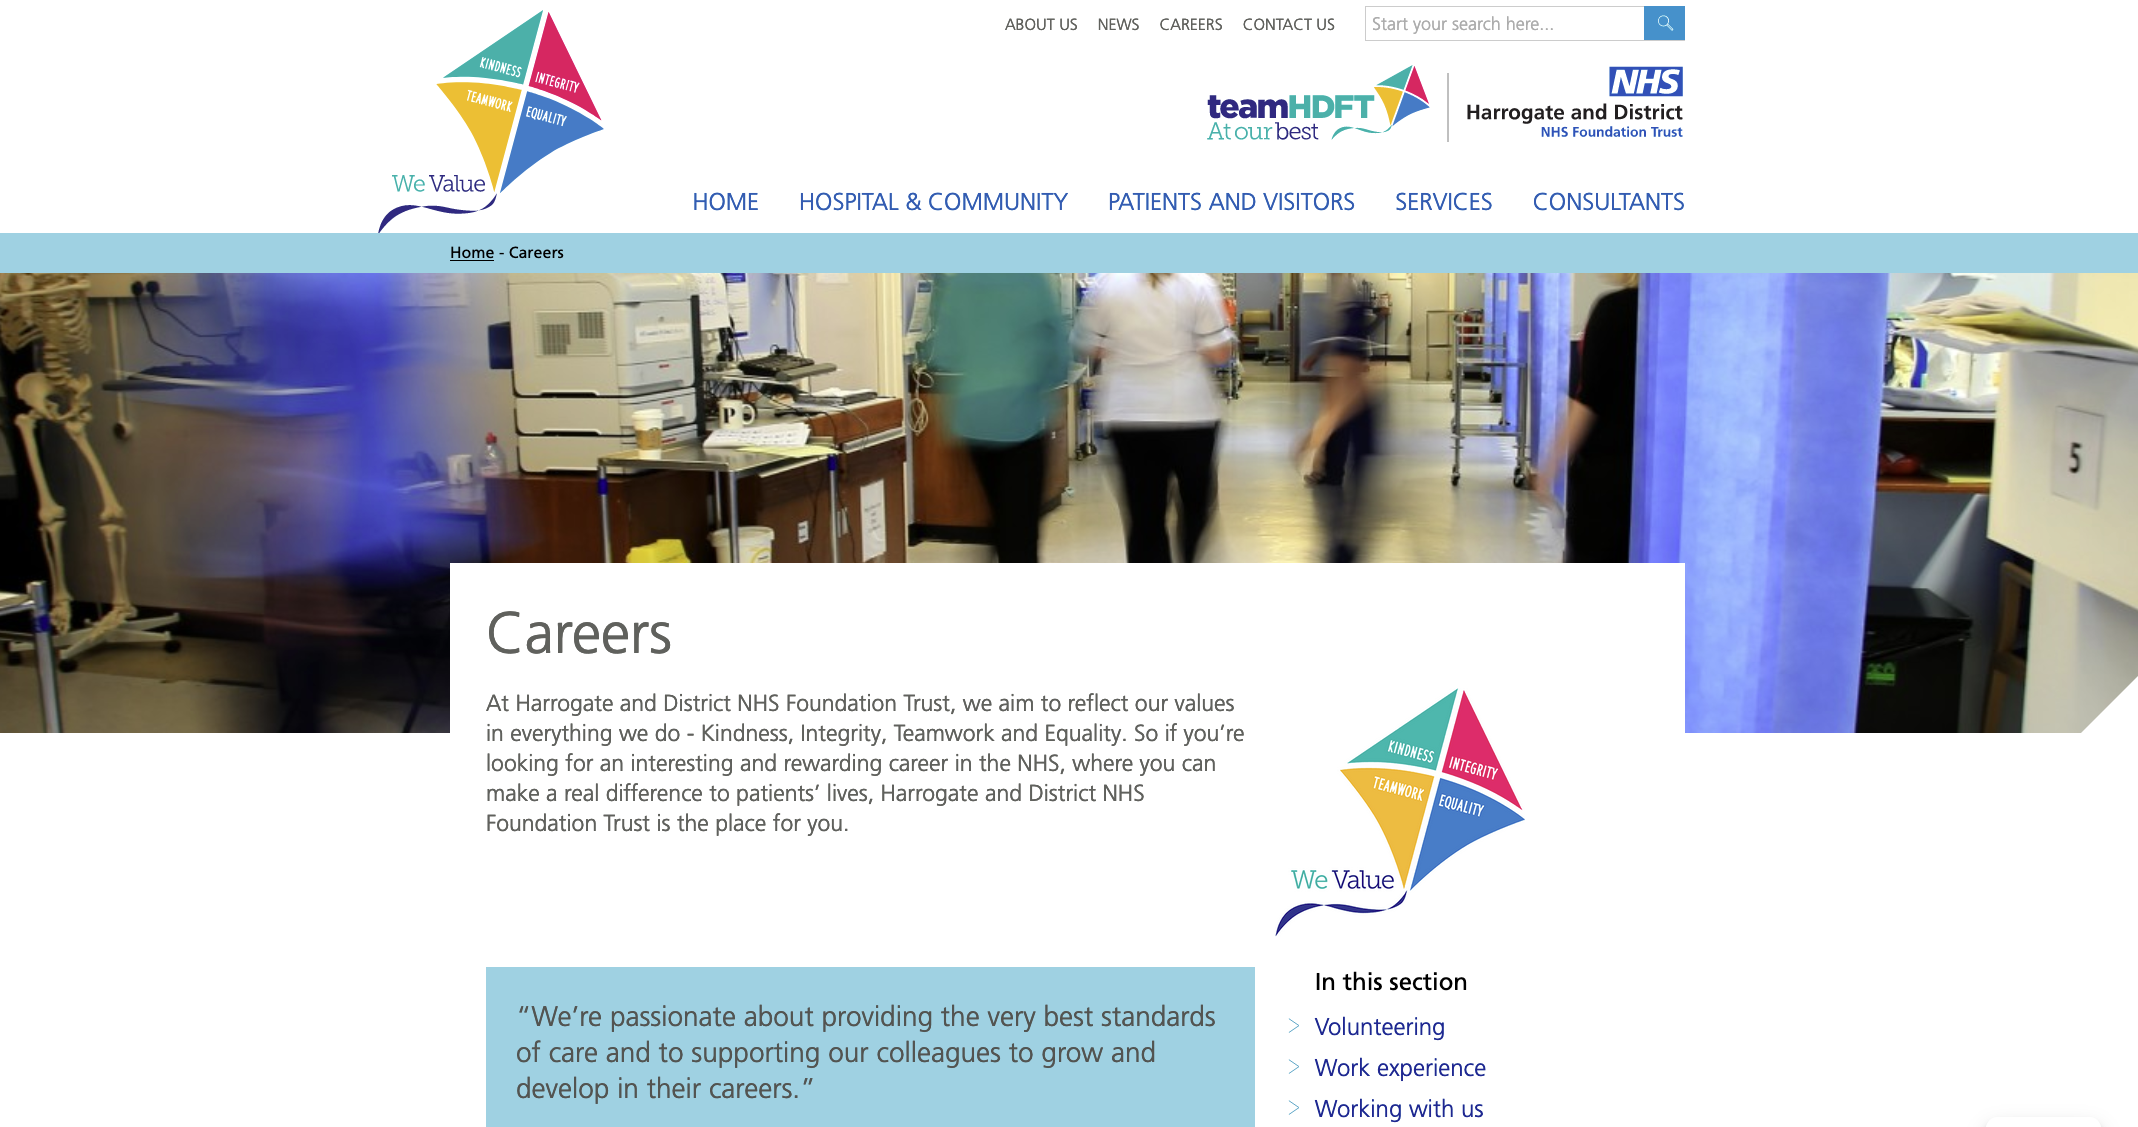 screenshot of teamHDFT At our best page on careers